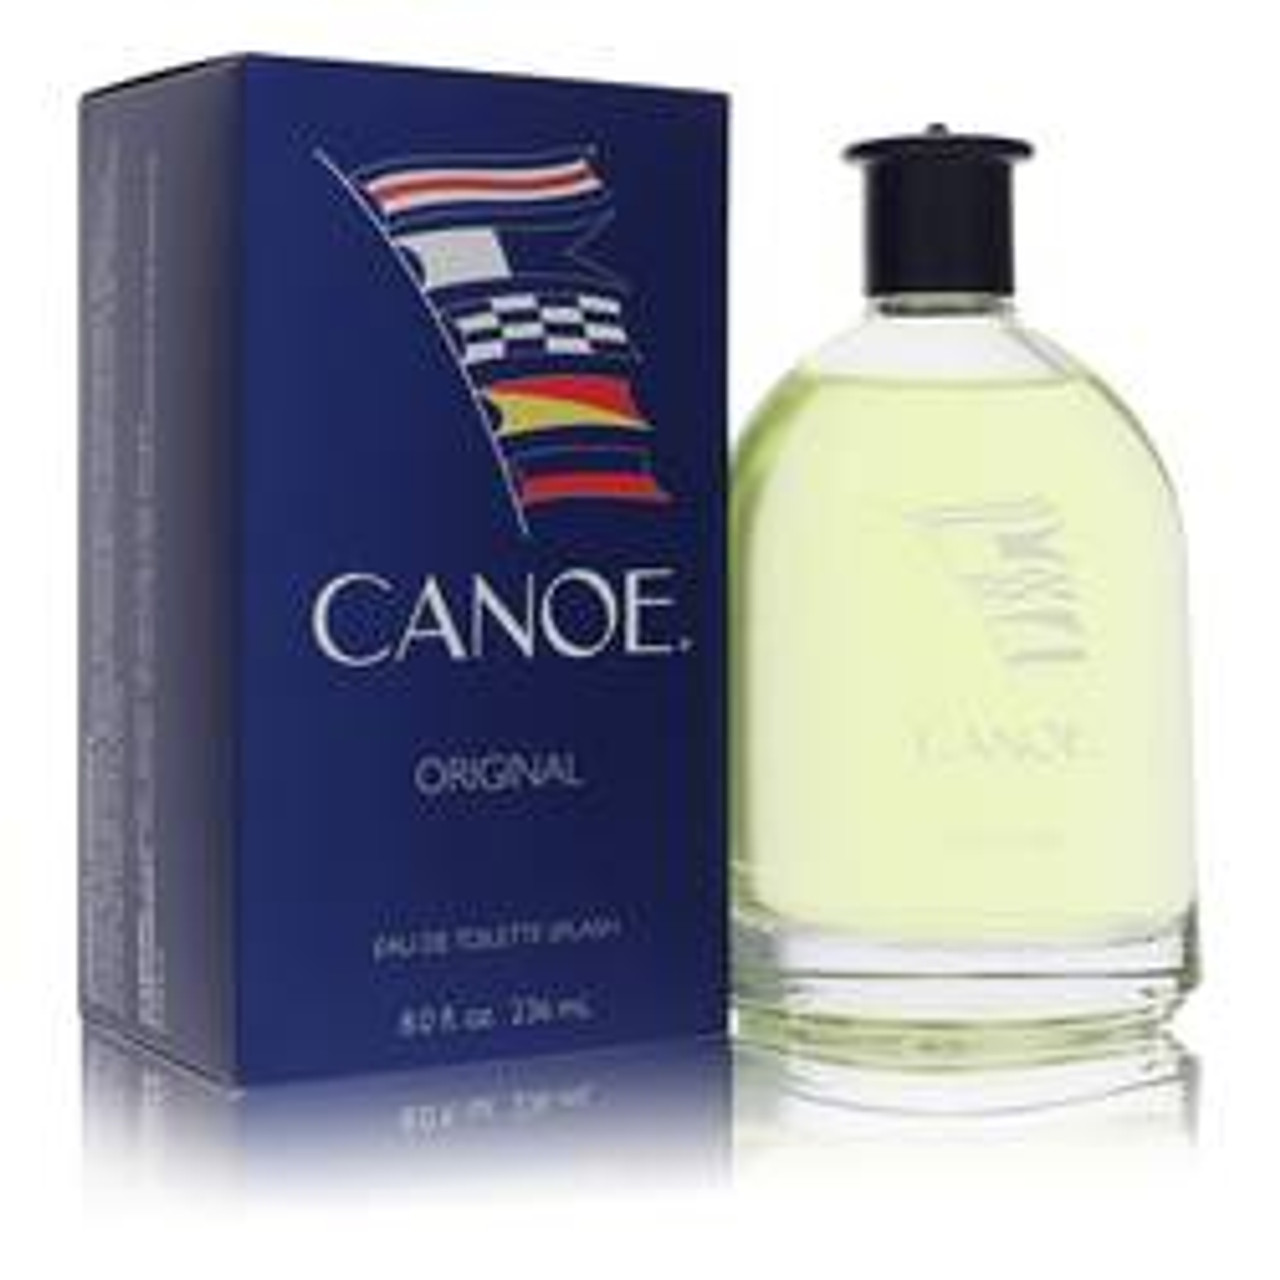 Canoe Cologne By Dana Eau De Toilette / Cologne 8 oz for Men - [From 75.00 - Choose pk Qty ] - *Ships from Miami